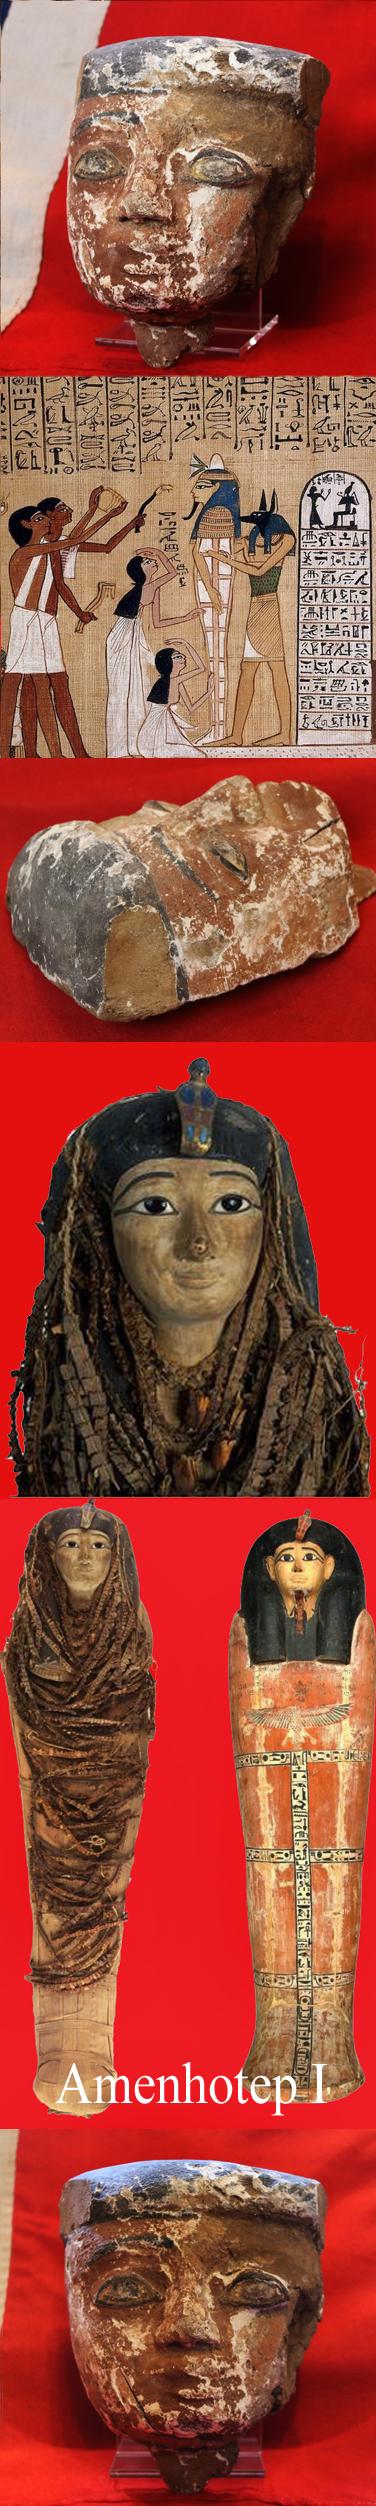 A Fabulous Original Egyptian Carved Wooden Mummy Mask 25th to 26th Dynasty Period to late Dynastic Period